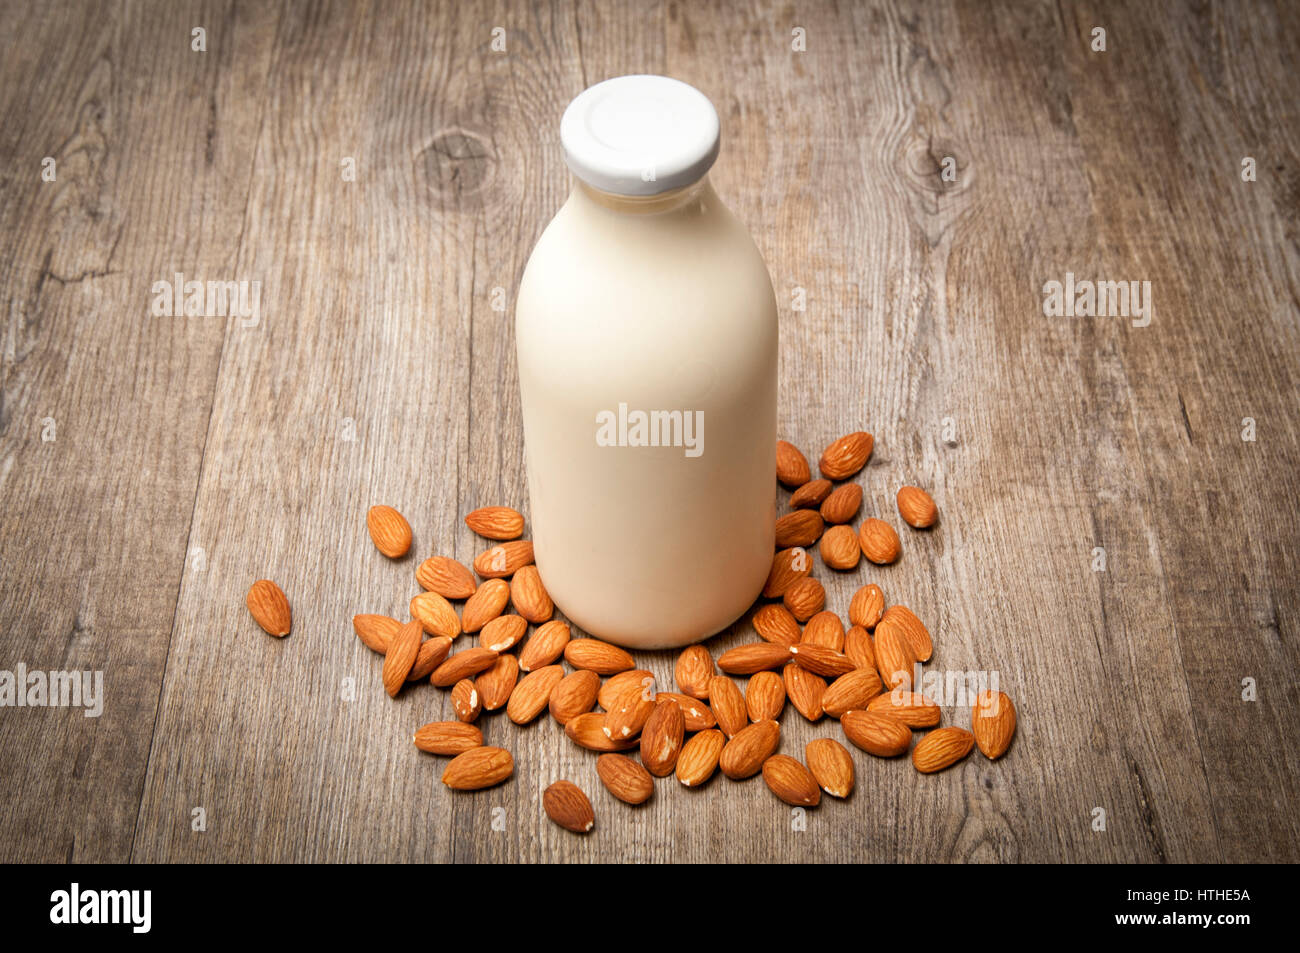 Milk bottle with almond milk and whole almonds on a wooden table Stock Photo